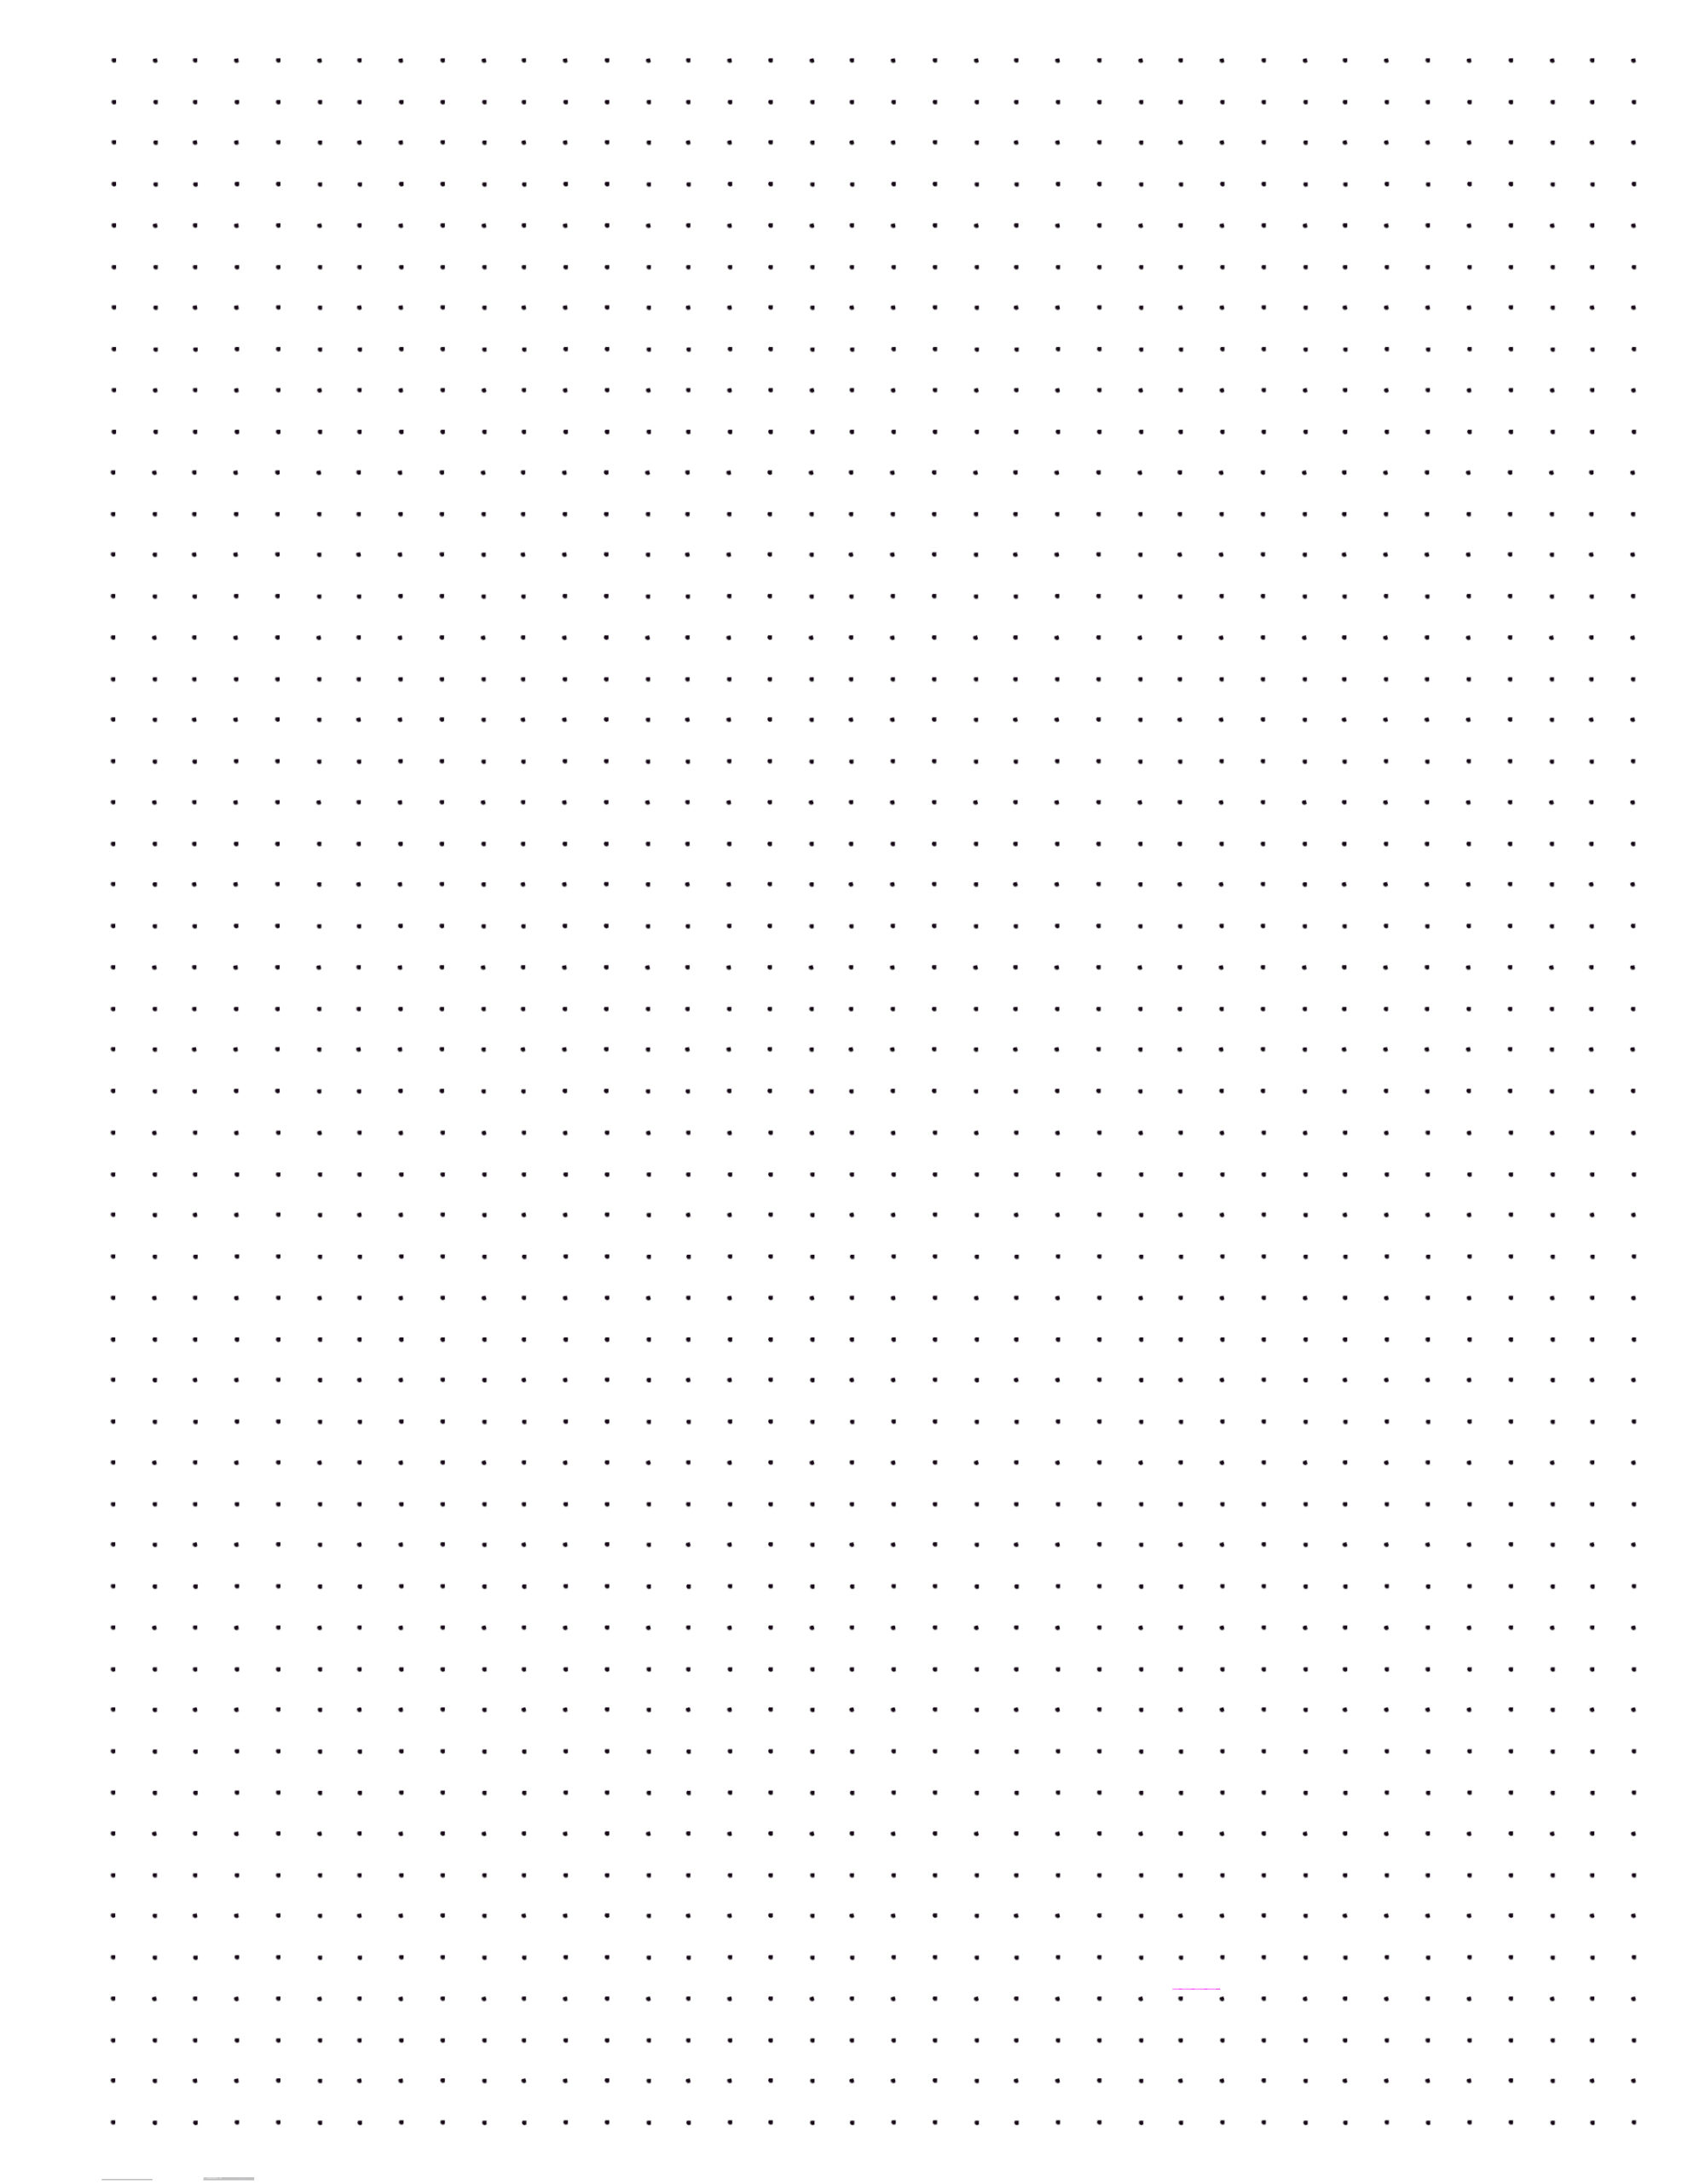 free-printable-dot-grid-paper-get-what-you-need-for-free